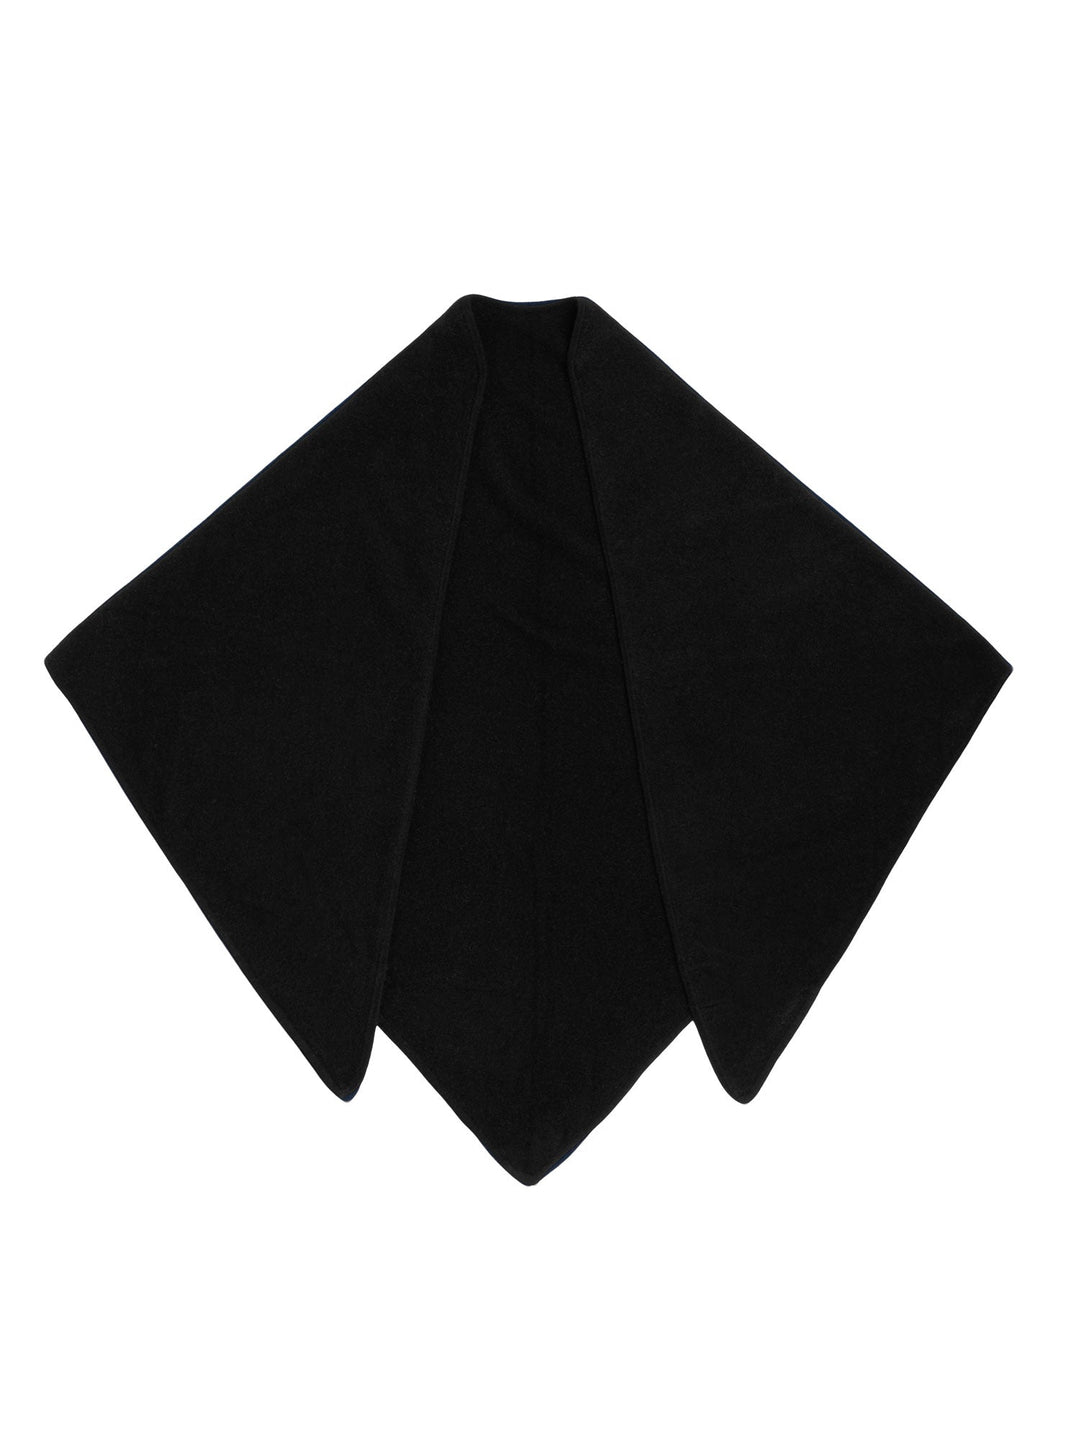 Cashmere scarf "Triangle" in 100% pure cashmere. Scandinavian design by Kashmina of Norway. Color: Black.